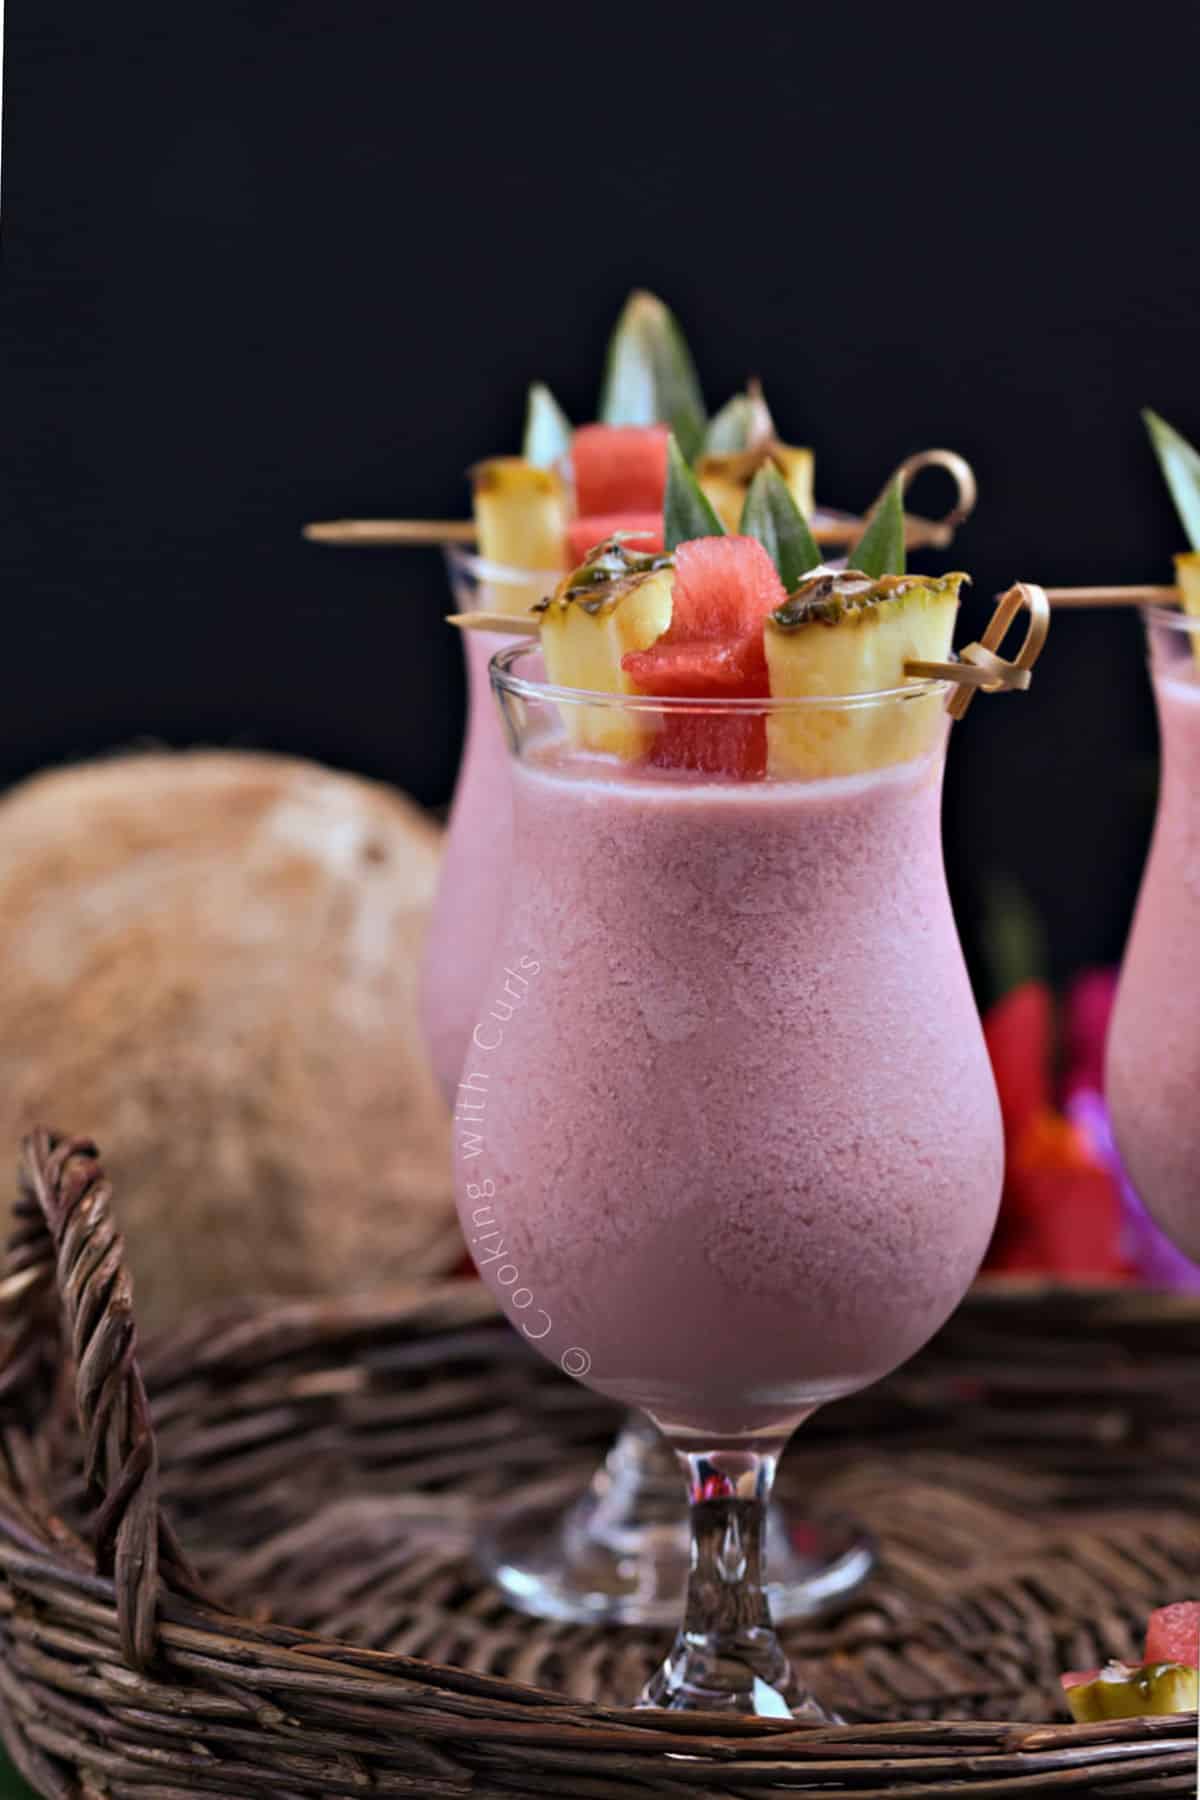 Looking at the sides of three cocktail glasses filled with a frozen pink drink garnished with pineapple wedges, leaves, and watermelon stars.